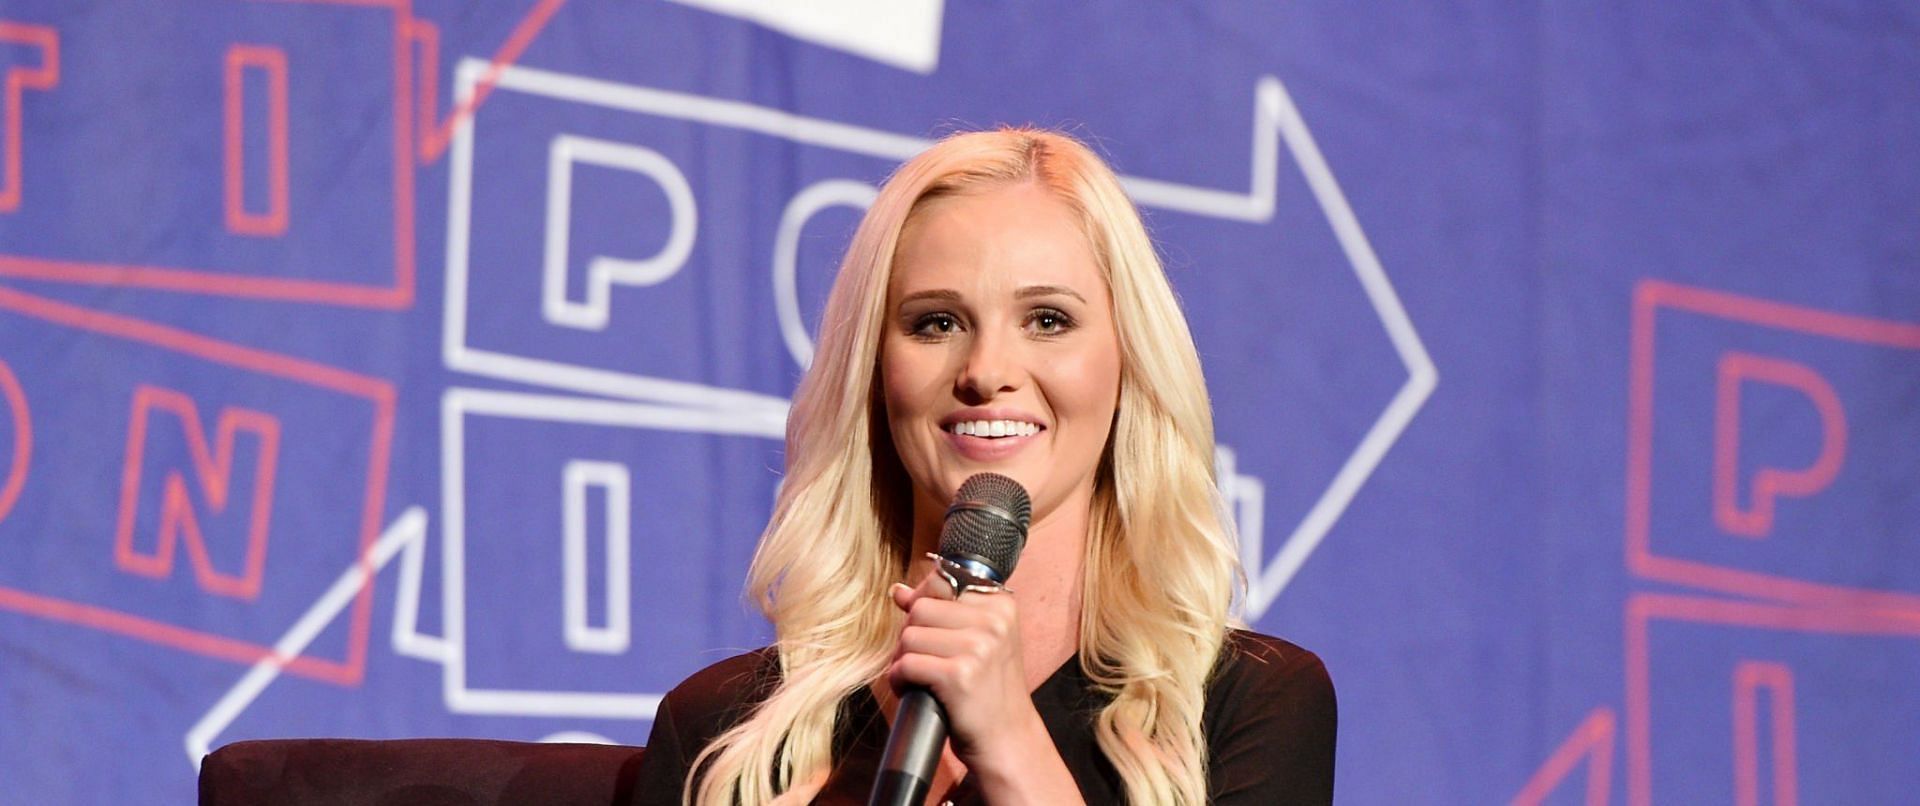 Tomi Lahren is an American conservative political commentator and TV host (Image via Getty Images)